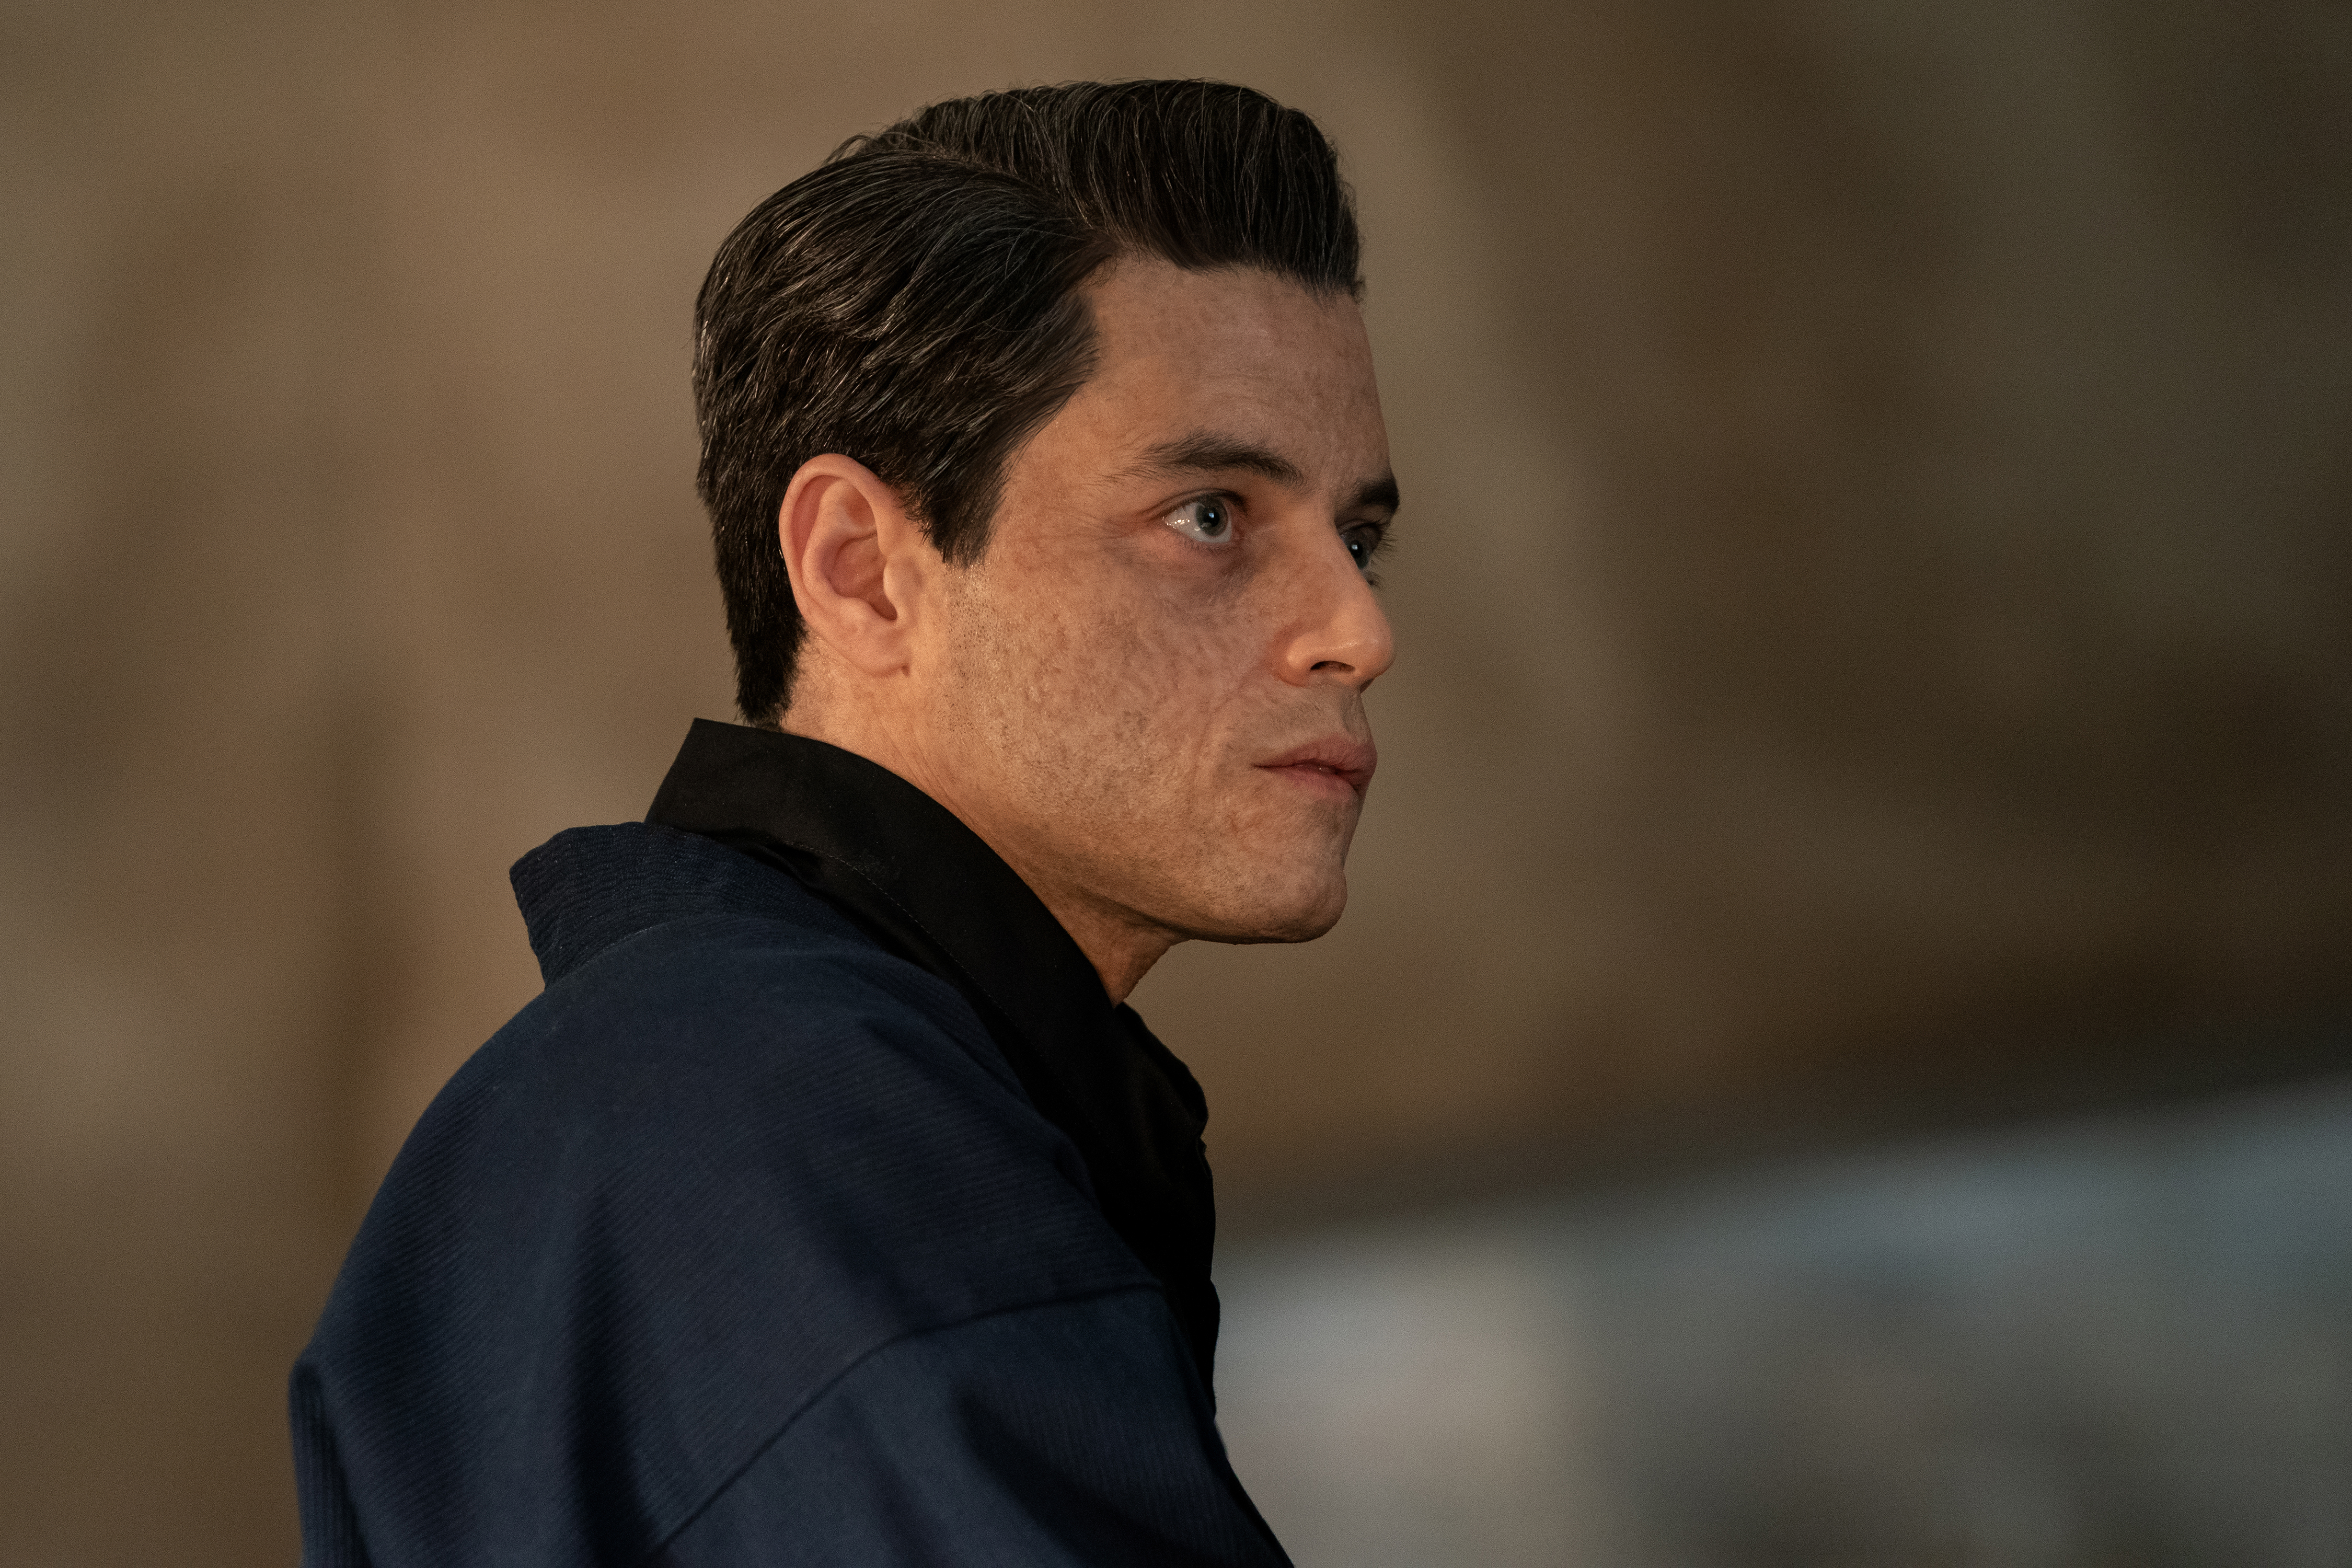 Safin (Rami Malek) in 'No Time to Die' (Nicola Dove—© 2020 DANJAQ, LLC AND MGM. ALL RIGHTS RESERVED.)